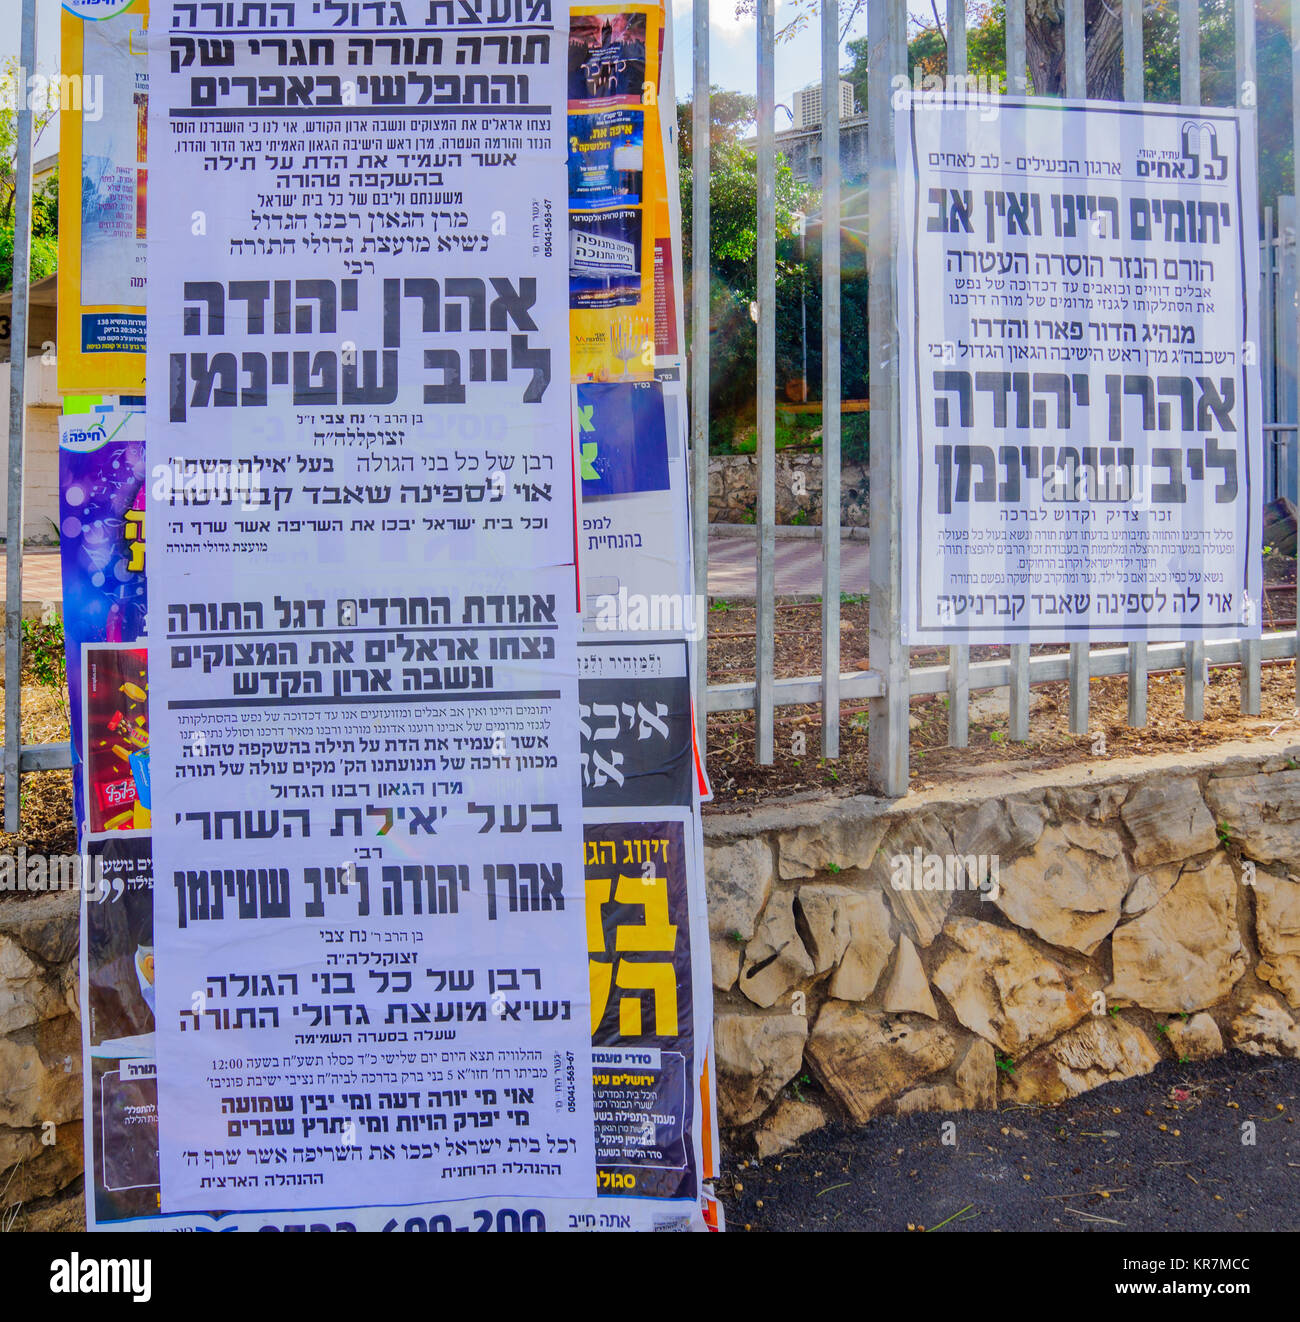 HAIFA ISRAEL DECEMBER 14 2017 Poster for the memory of the deceased